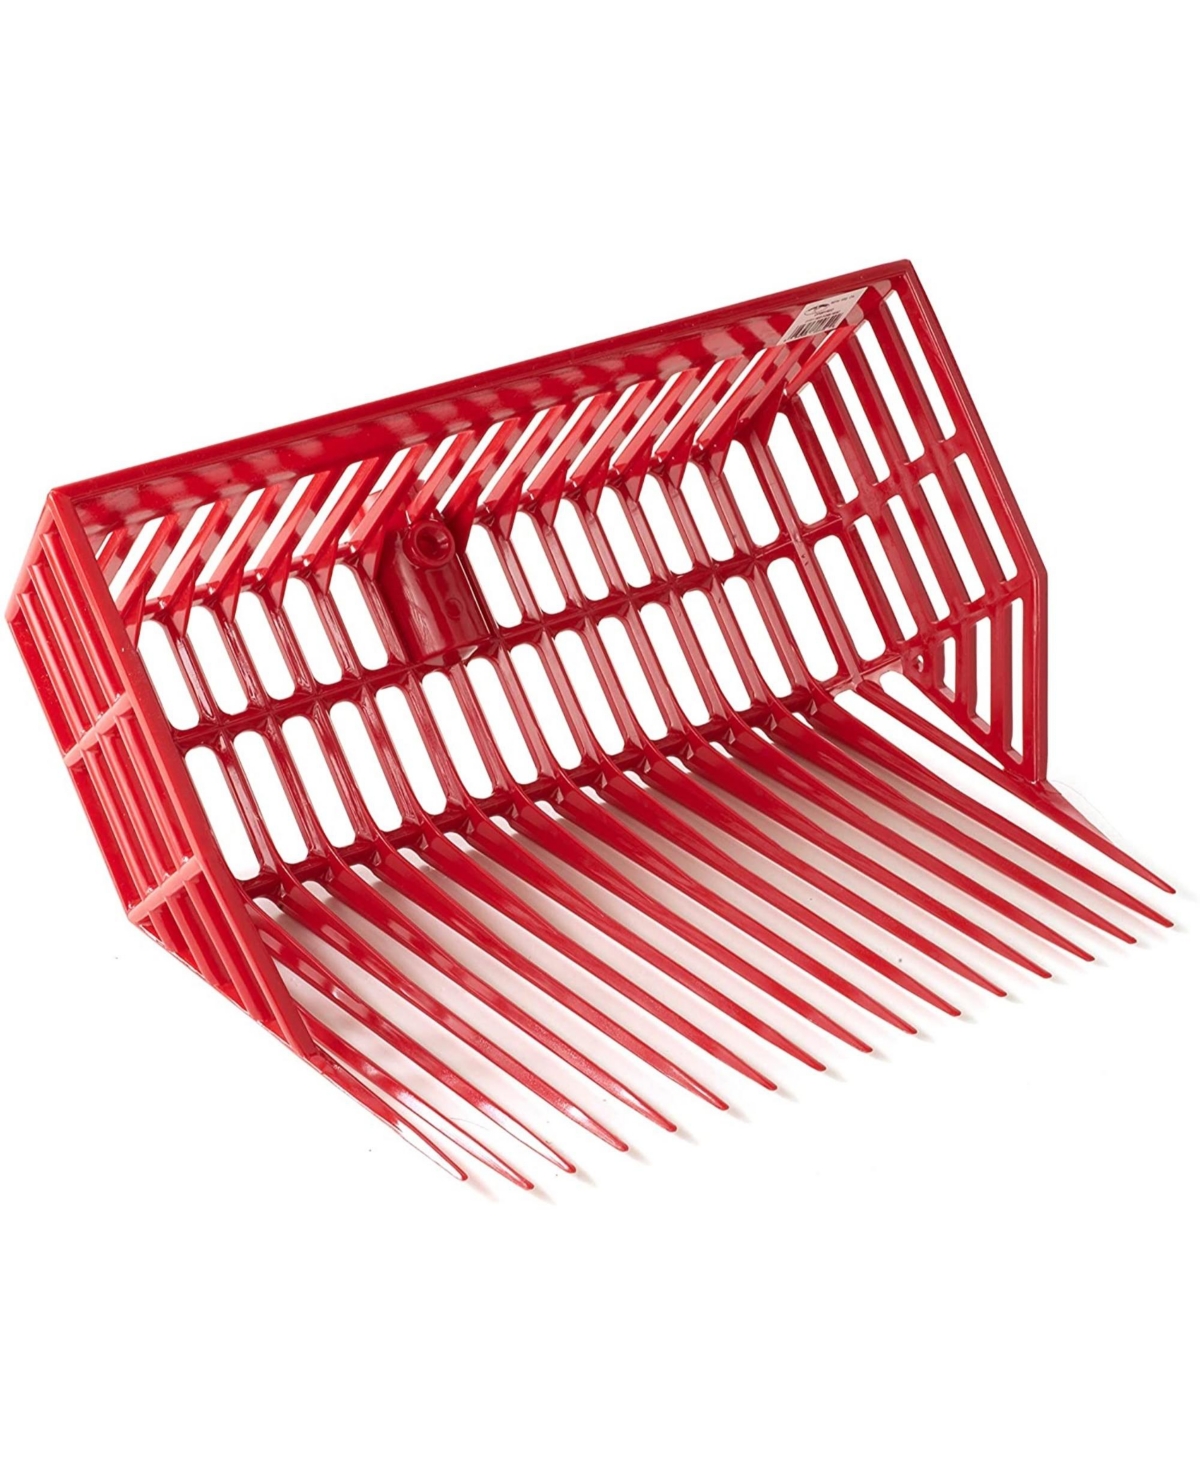 DuraPitch Ii Pitch Fork Head Polycarbonate Stable Fork Head - Red